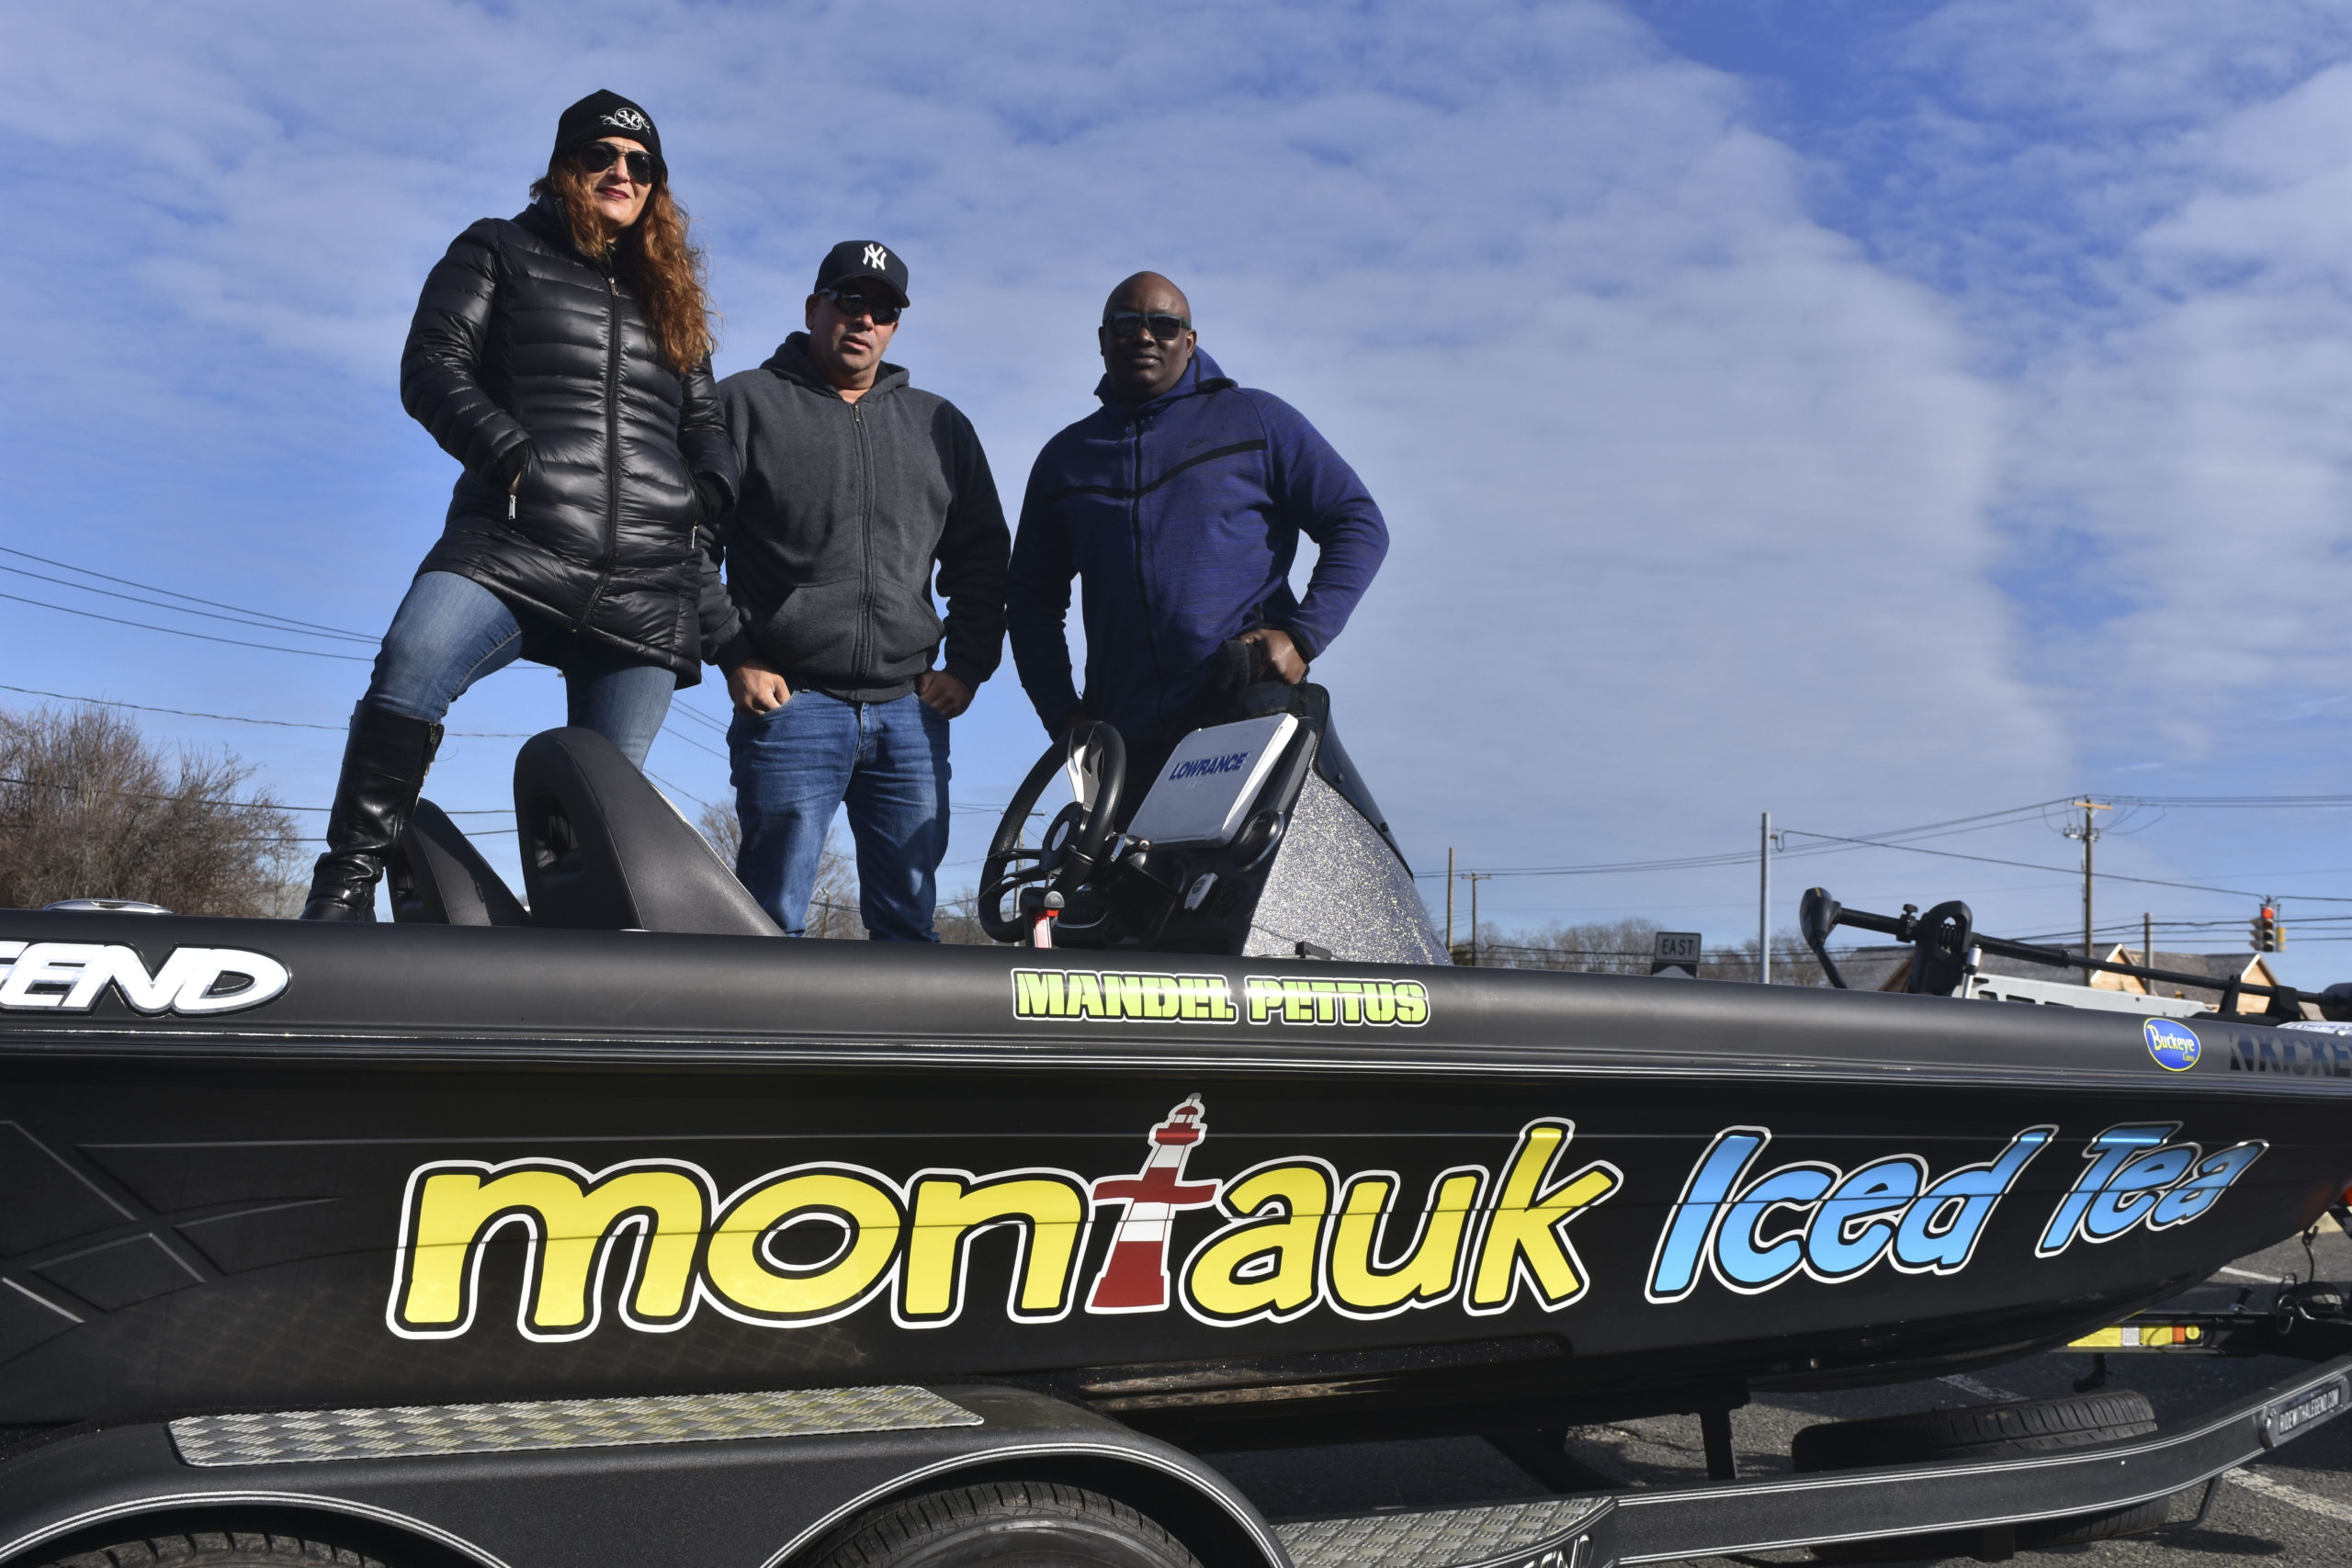 Living A Dream 
January 17 -- Southampton native Mandel Pettus with his wife Carmen Pettus and friend and sponsor Michael White. Mr. Pettus won the 2018 Bass Pro Shops Bassmaster Opens Championship that jump started his professional career in bass fishing.